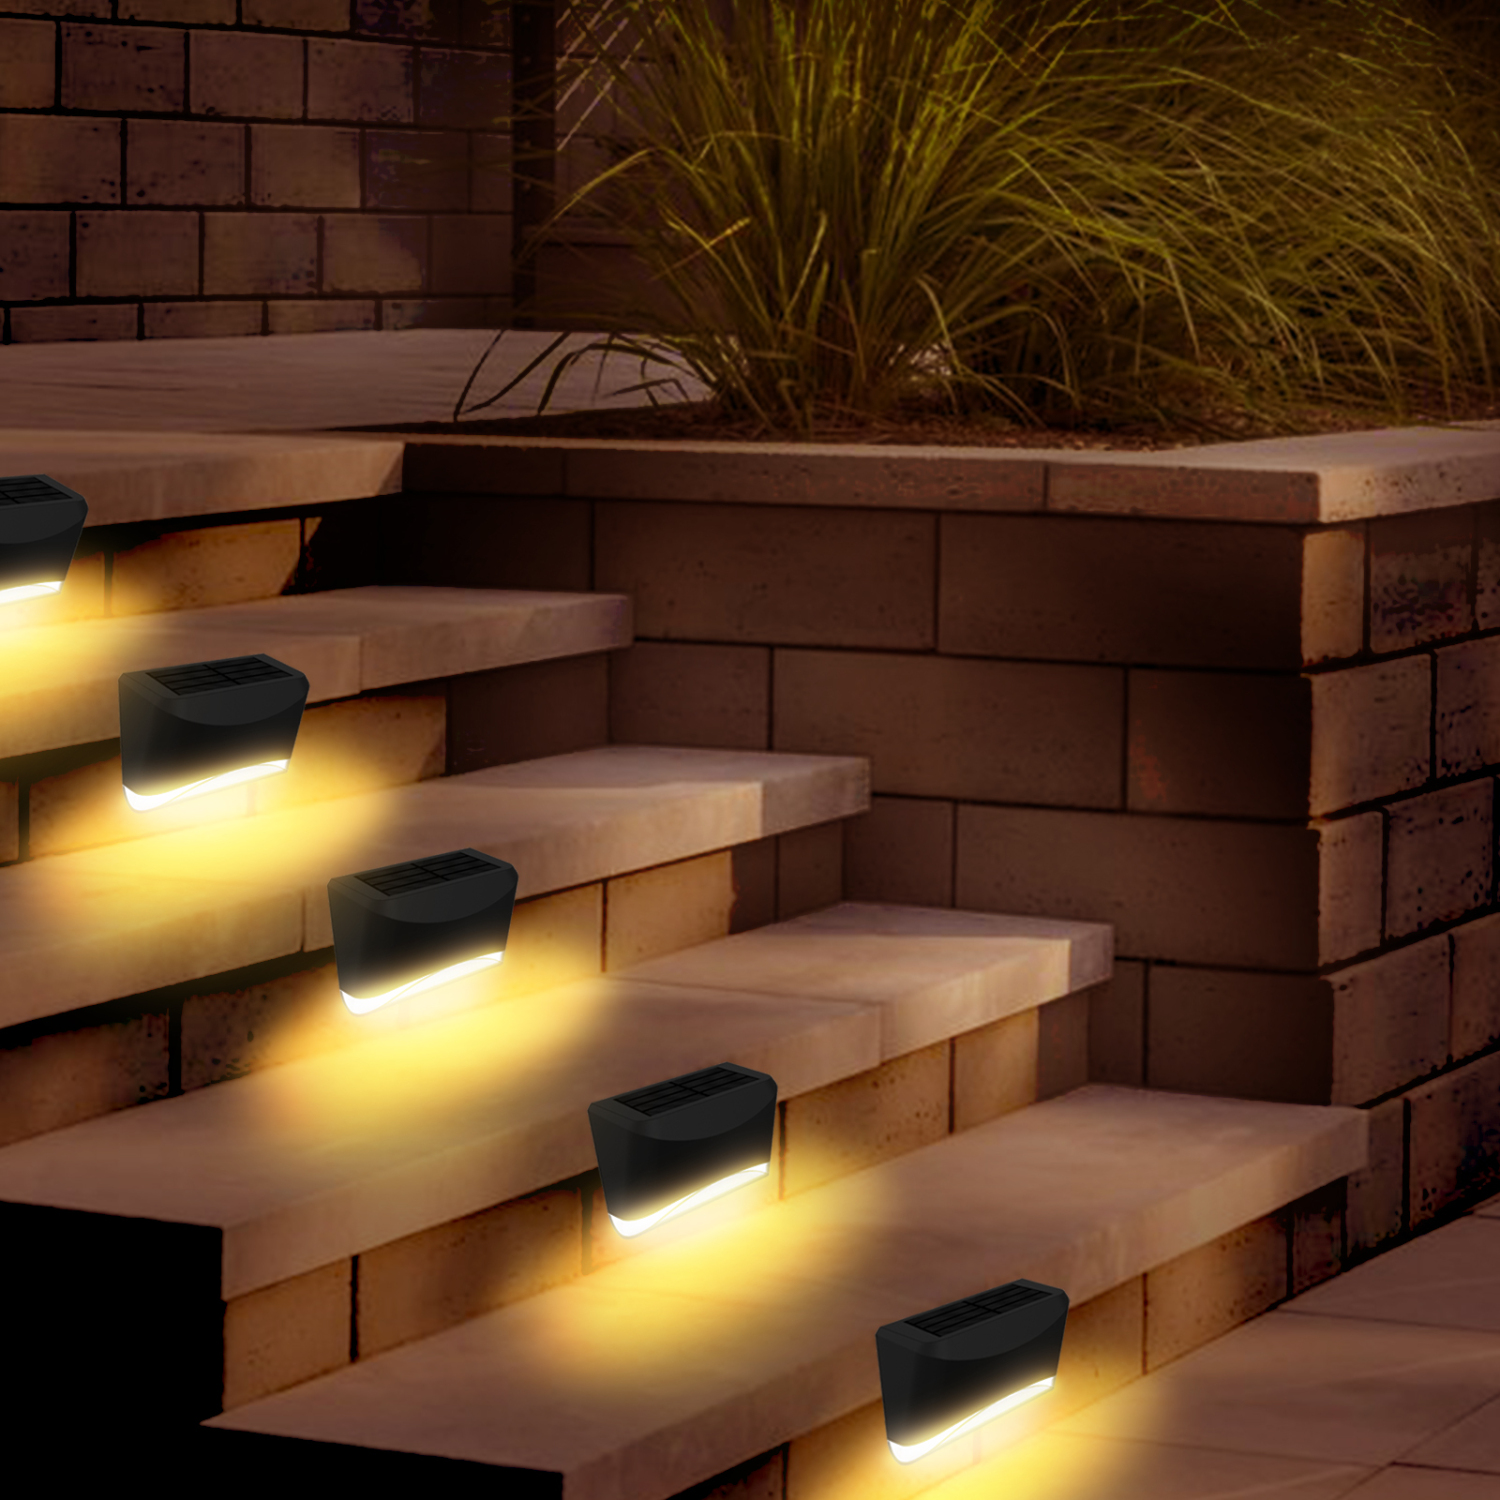 Aigostar Solar Deck Lights Outdoor, 12 Pack Solar Step Lights Waterproof Led Fence Light Solar Powered, Outdoor Lighting for Stairs Patio Garden Pathway Walkway Railing & Driveway, Warm White